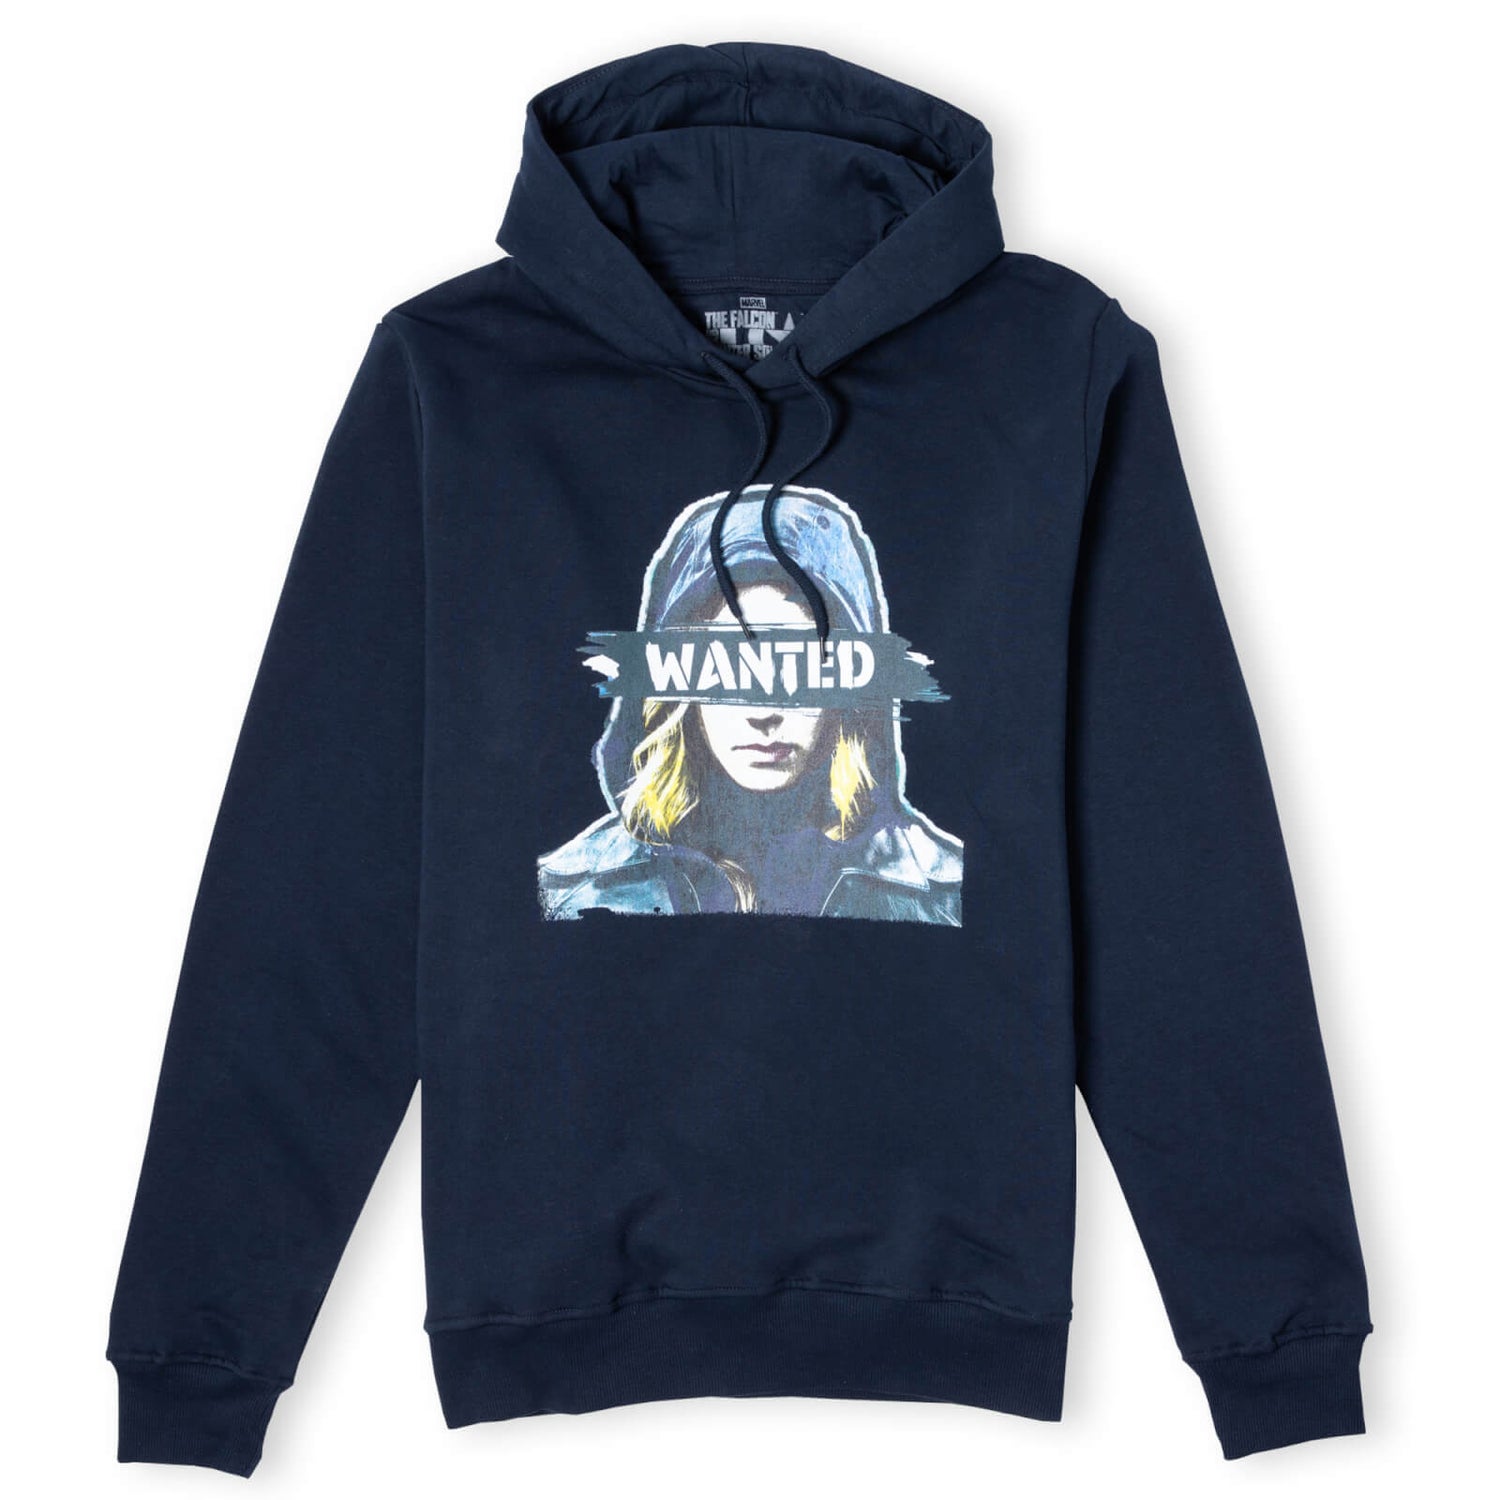 Falcon and Winter Soldier Sharon Carter Wanted Unisex Hoodie - Navy